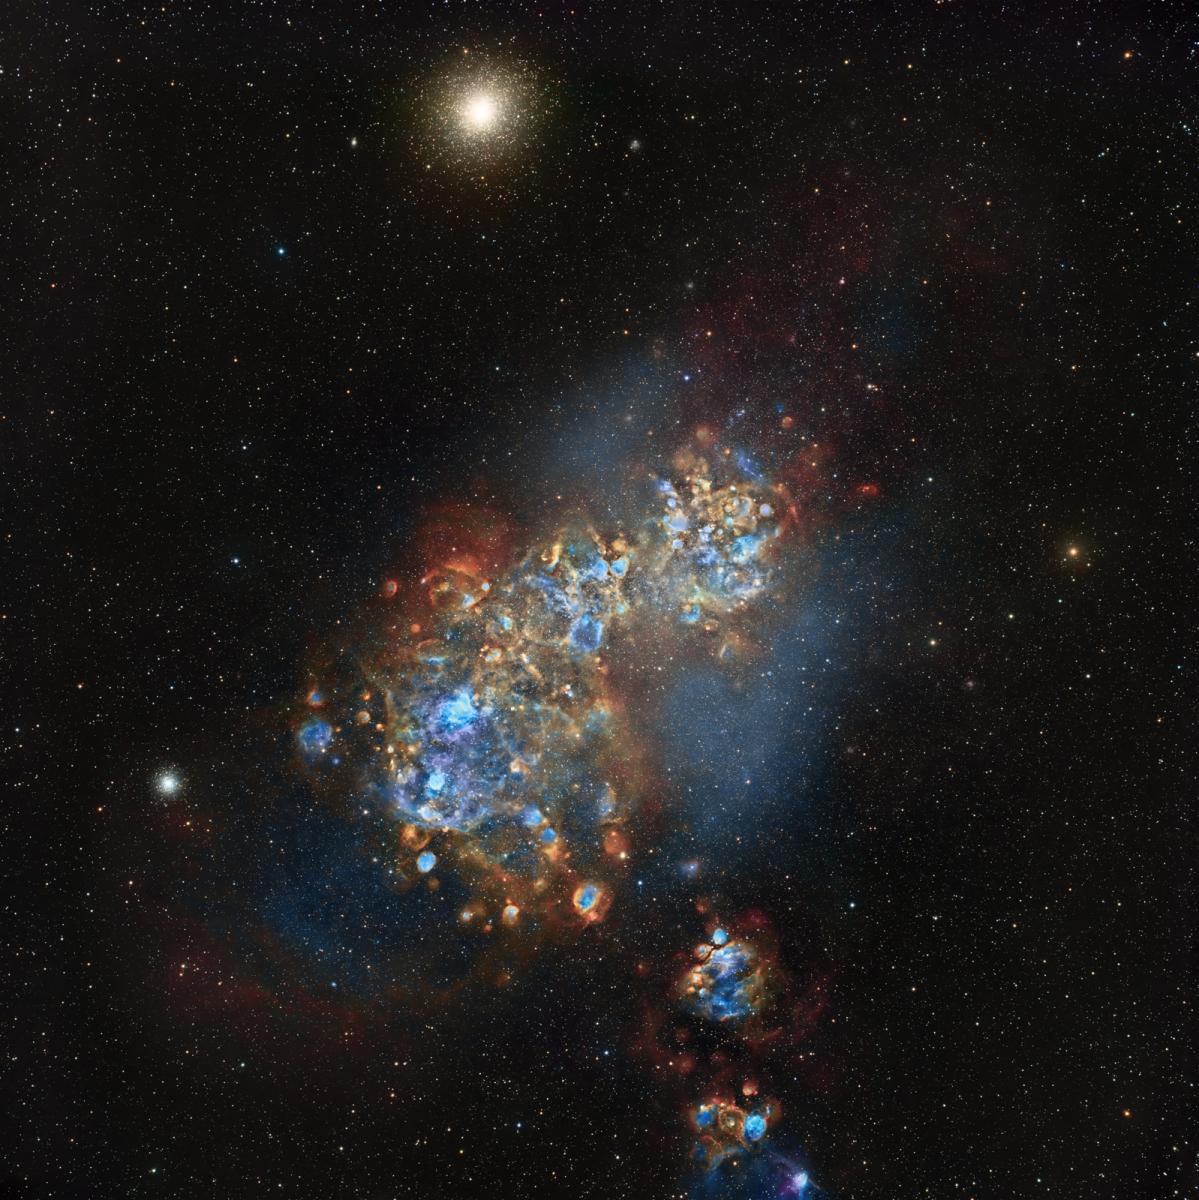 Blue, gold and orange galaxy in a cloud shape